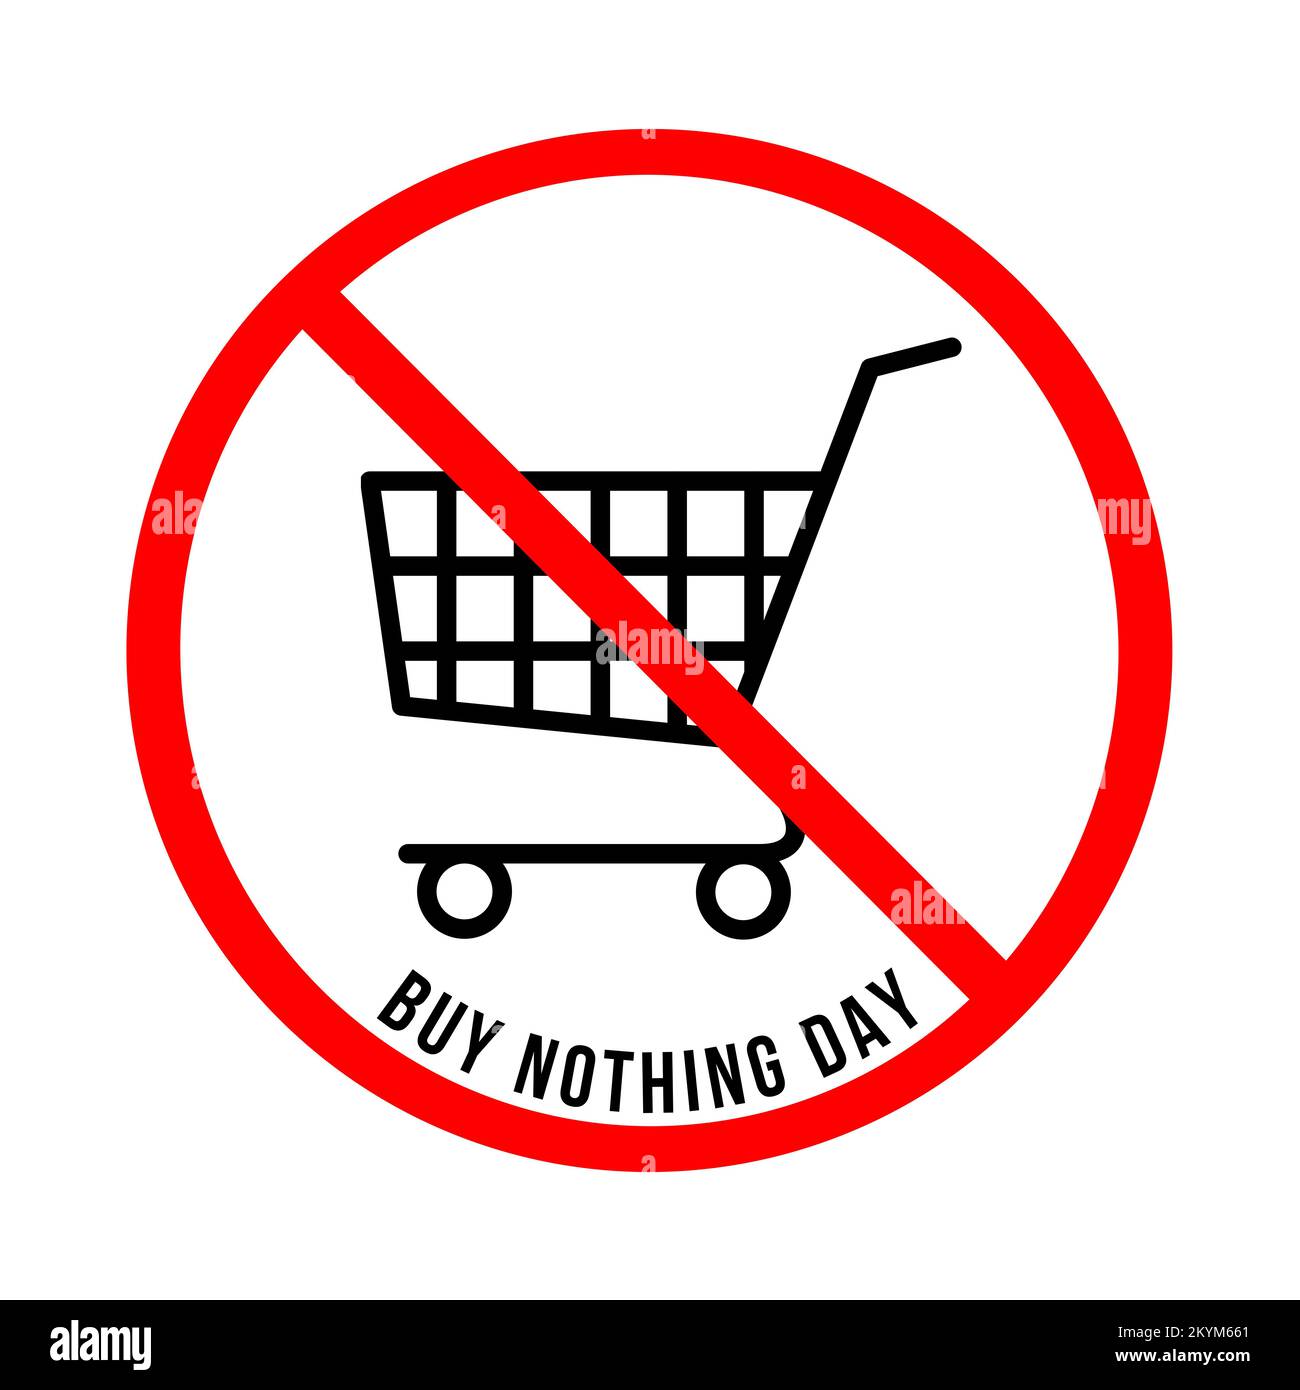 Buy nothing day sign icon Stock Photo